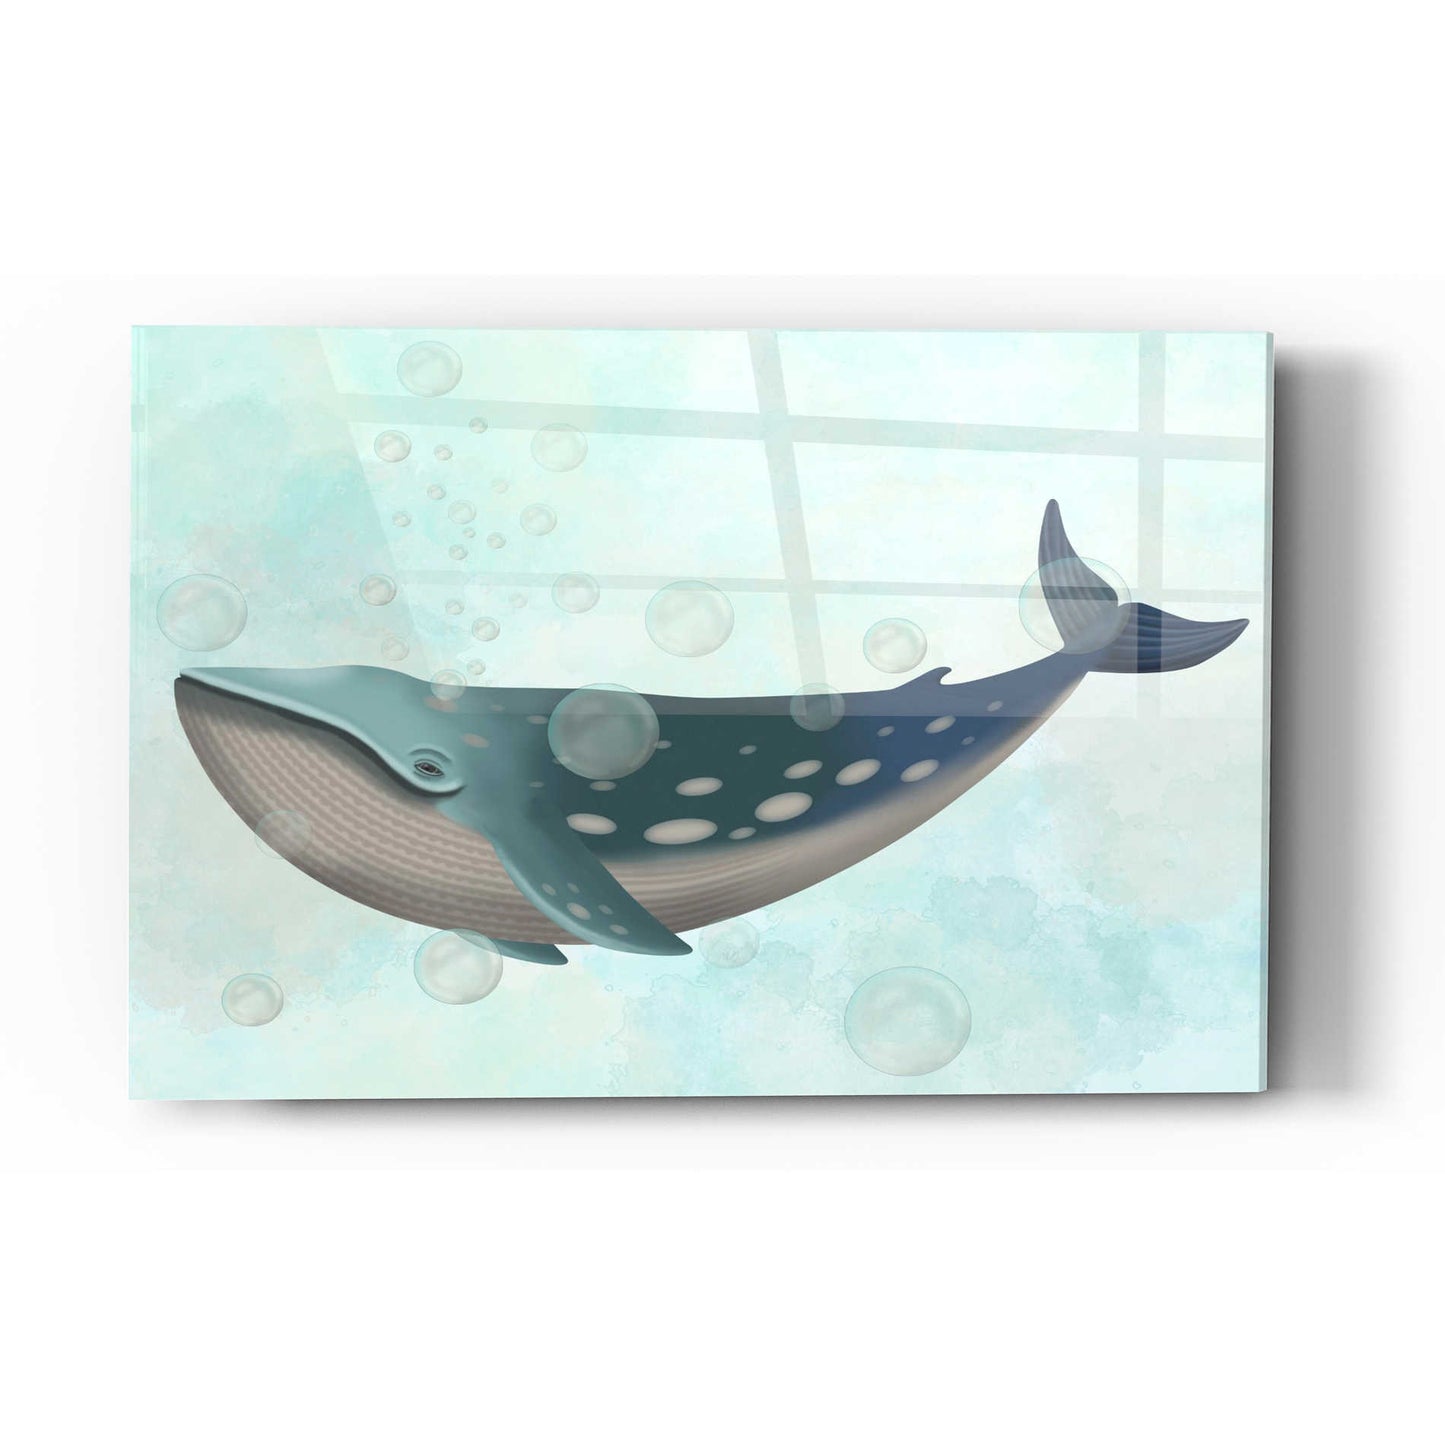 Epic Art 'Whale Bubbles 1' by Fab Funky Acrylic Glass Wall Art,12x16